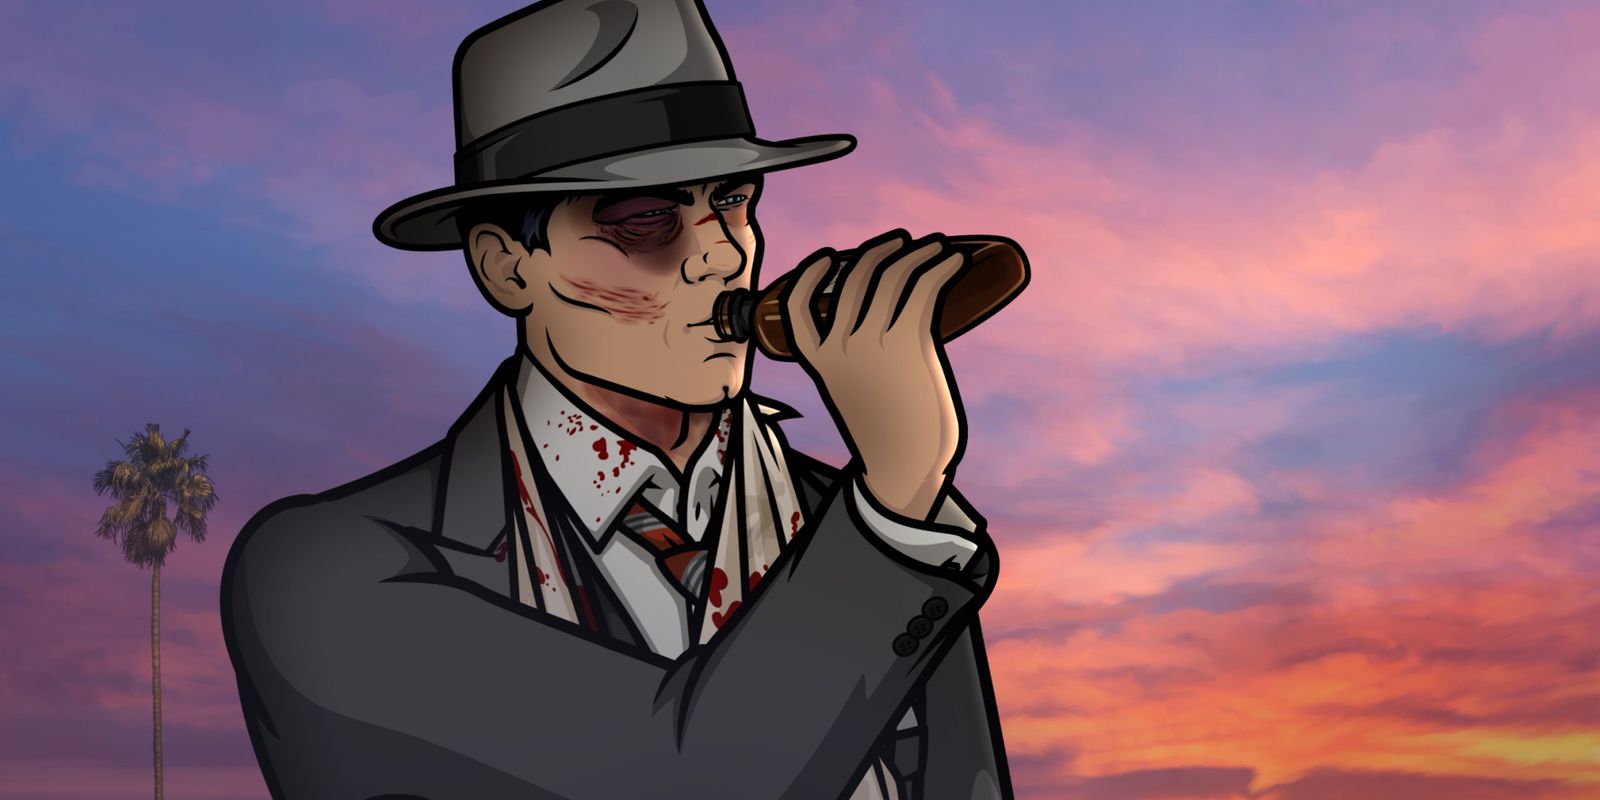 10 Awesome References You Missed From Archer Season 8